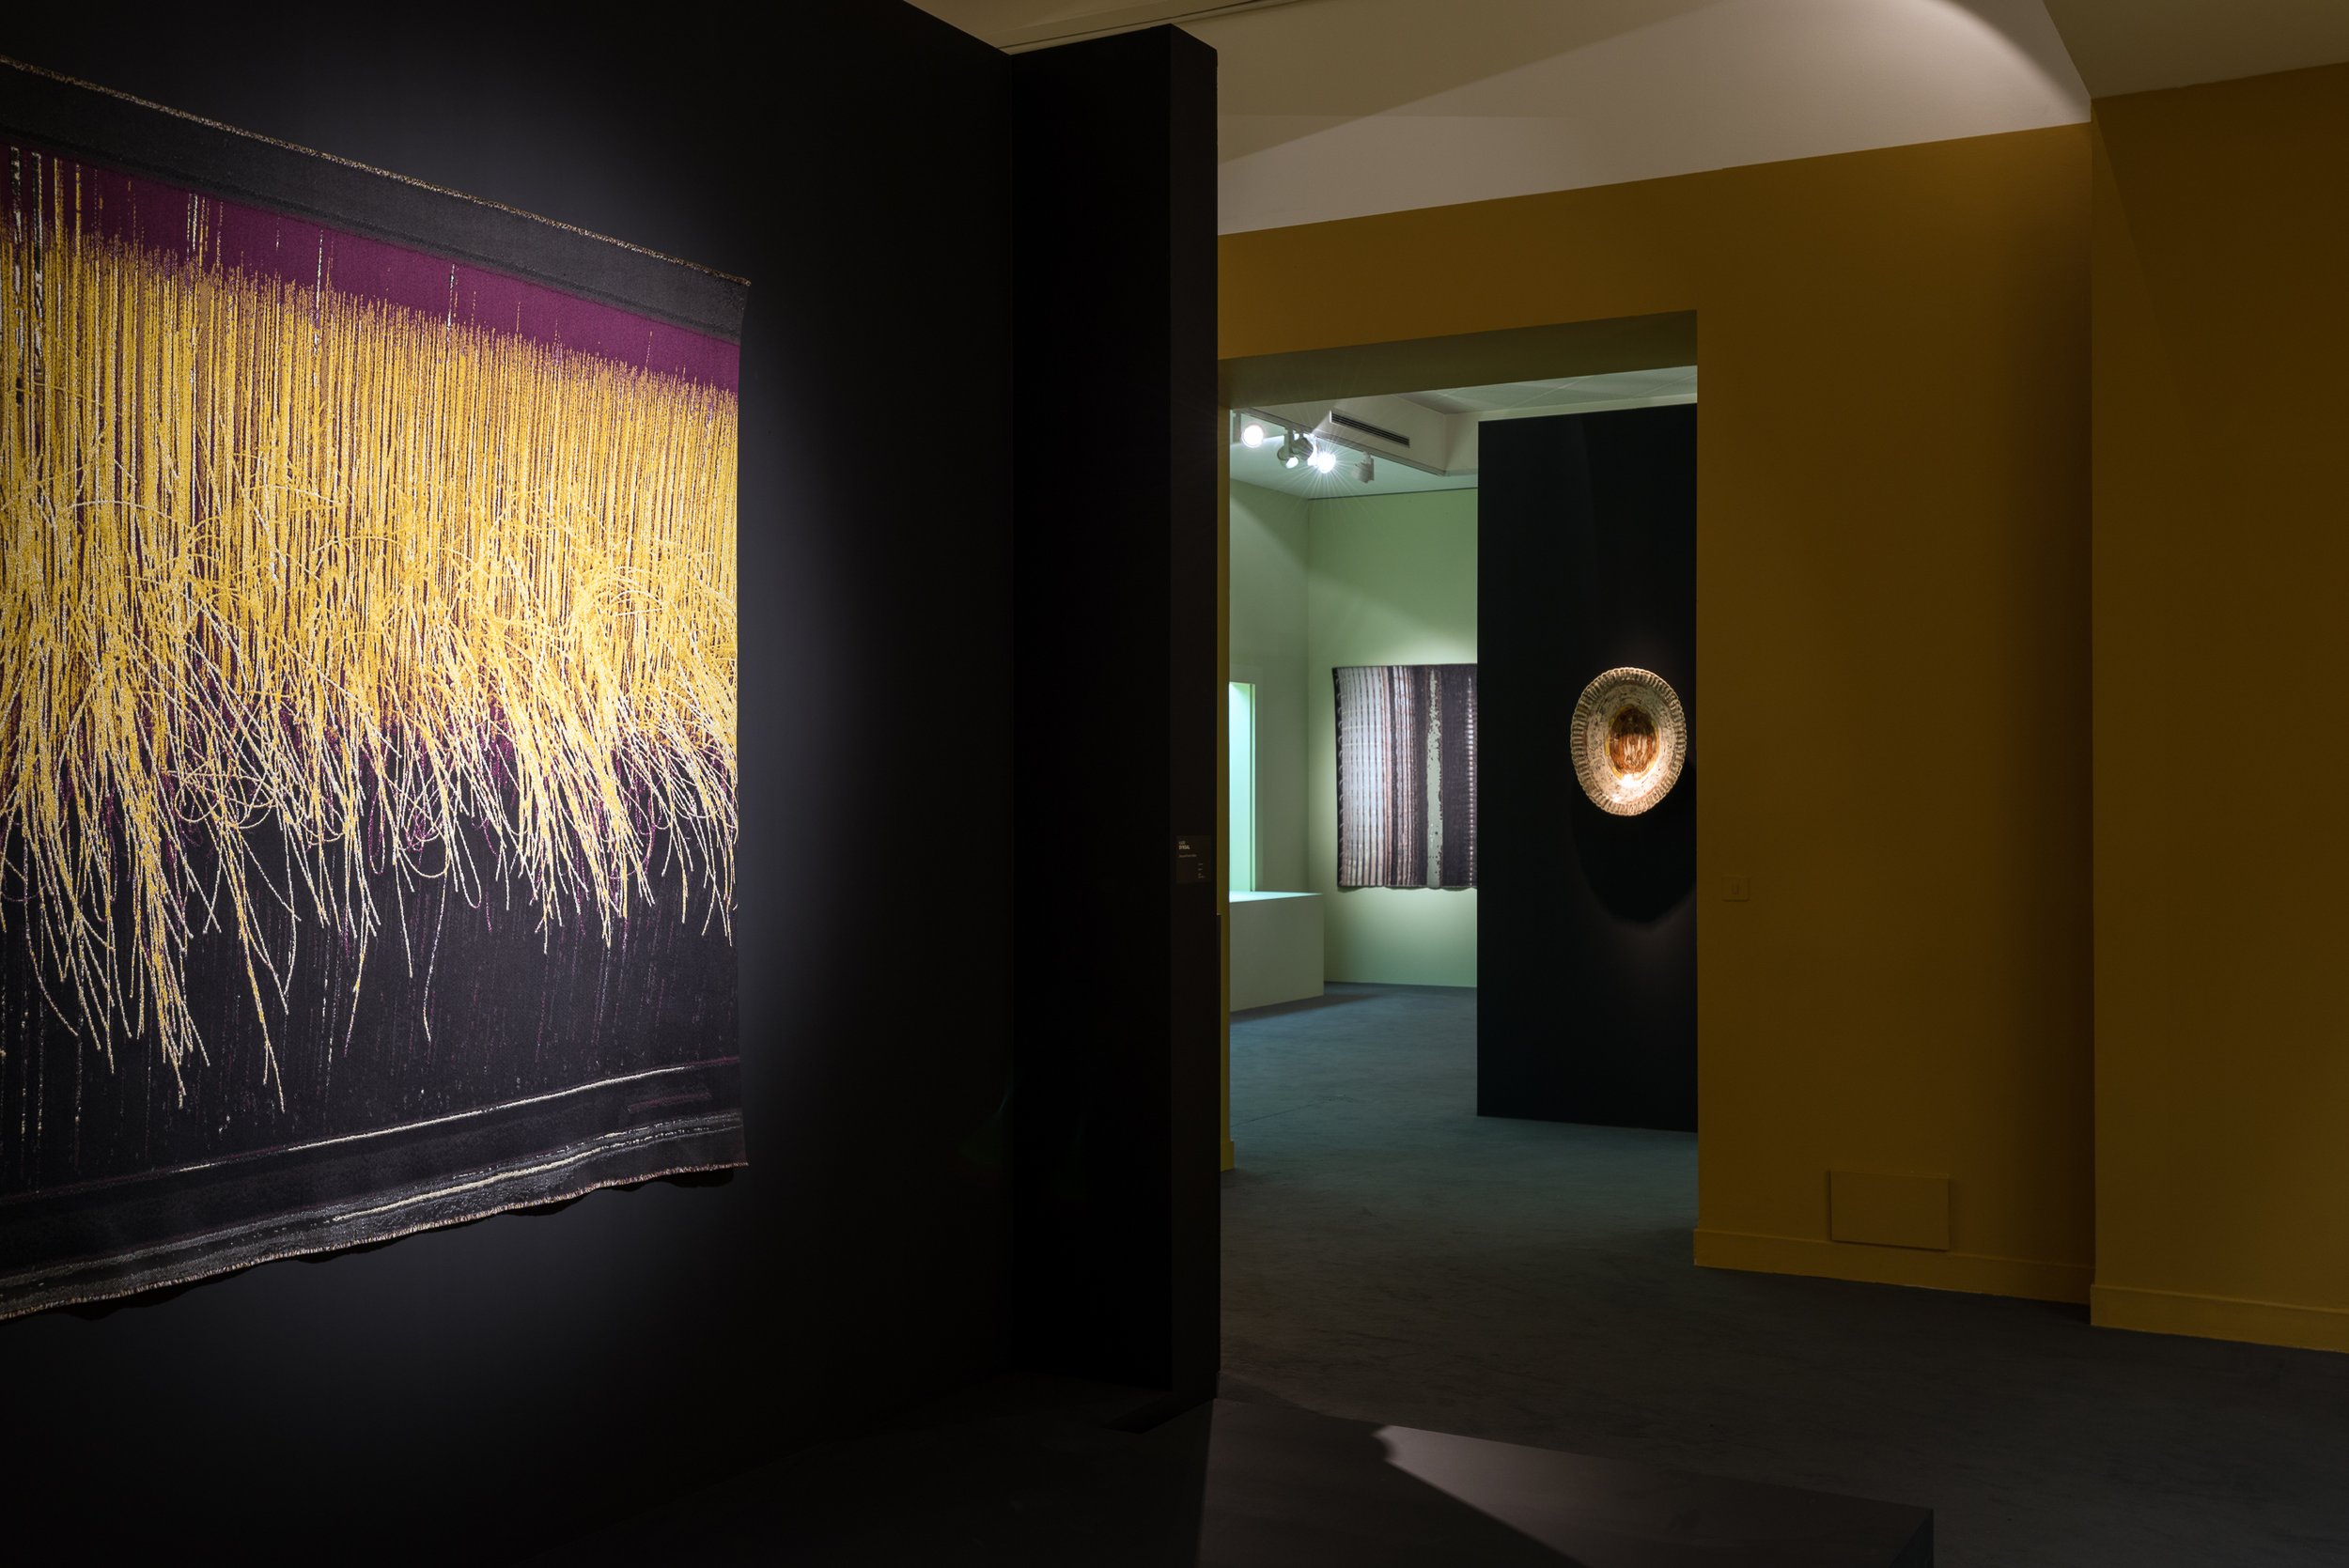 Installation View of Jacquard Knots Yellow in exhibition Forces of Nature, Sèvres Museum, Paris, France, 2018